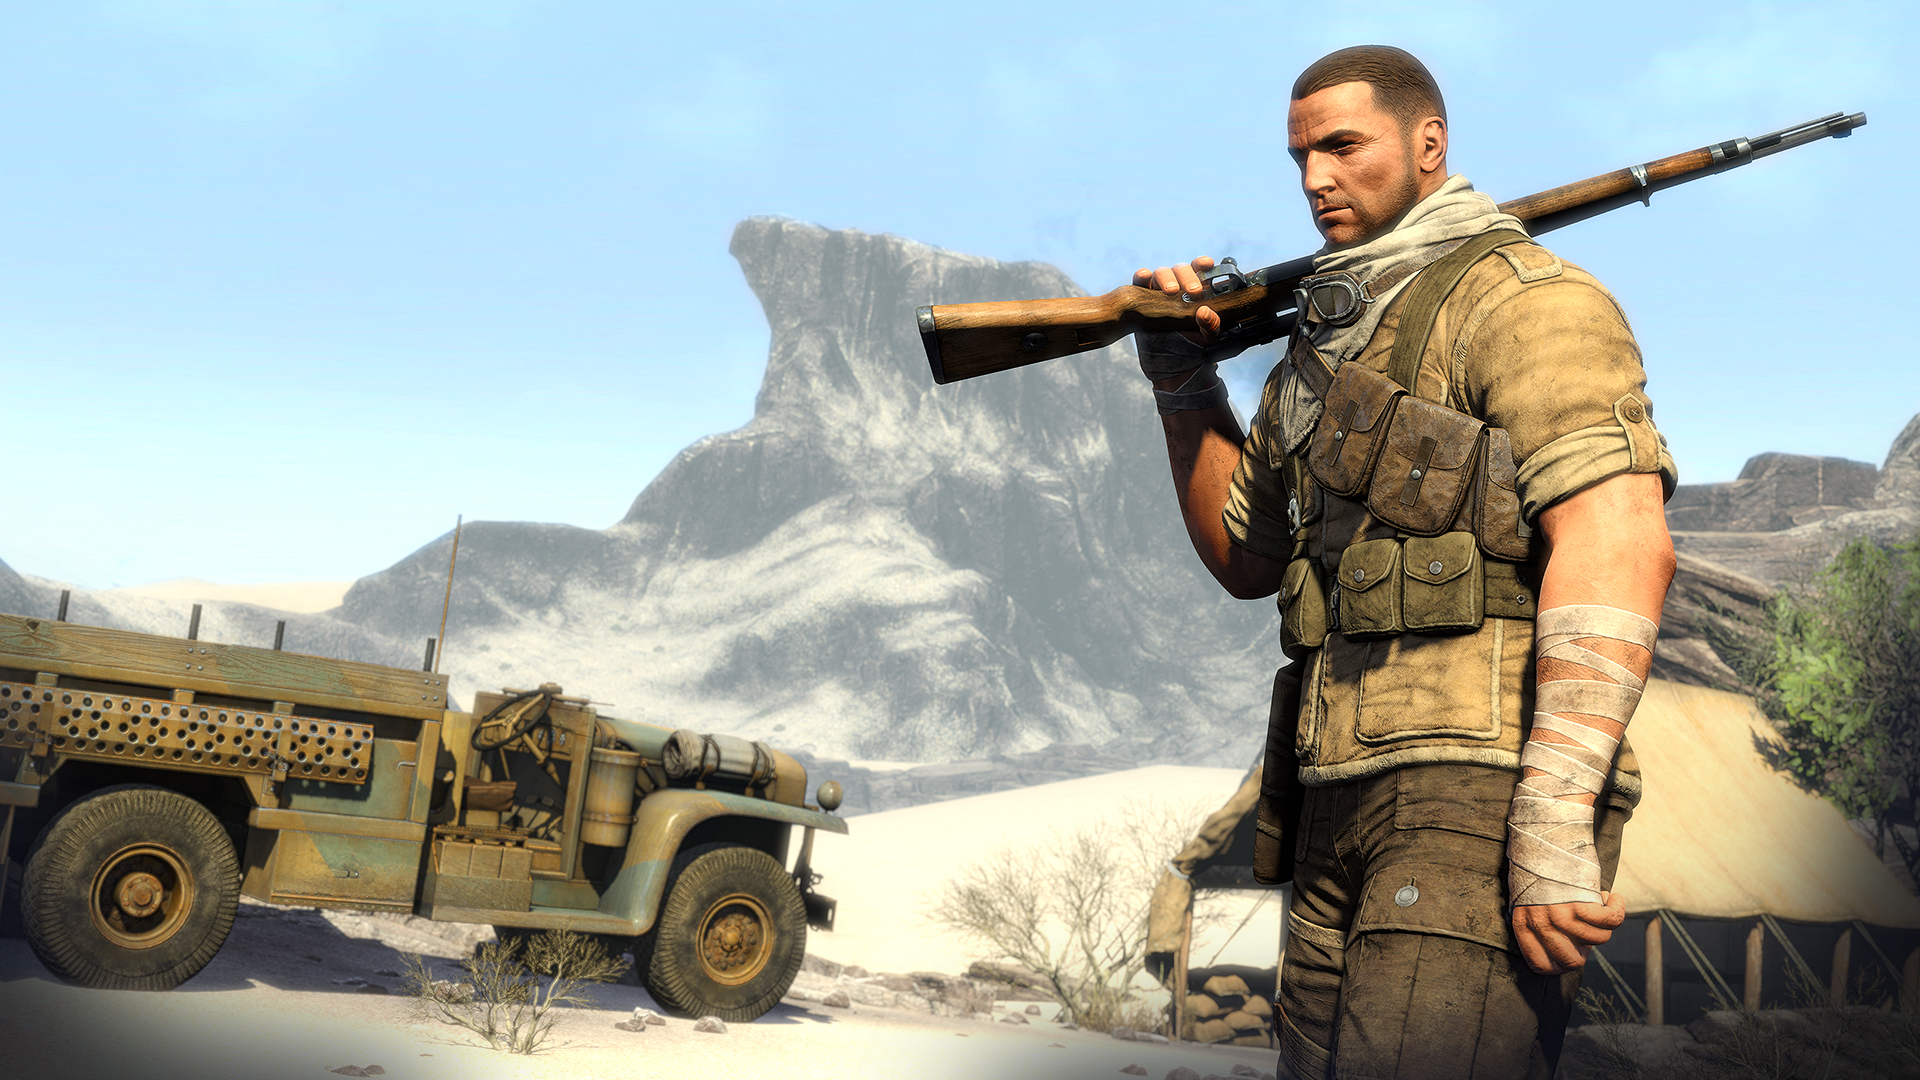 Rebellion says it has also started work on multiplayer DLC for Sniper Elite III, and explained that a "small part" of the game's 10GB day-one patch is ...